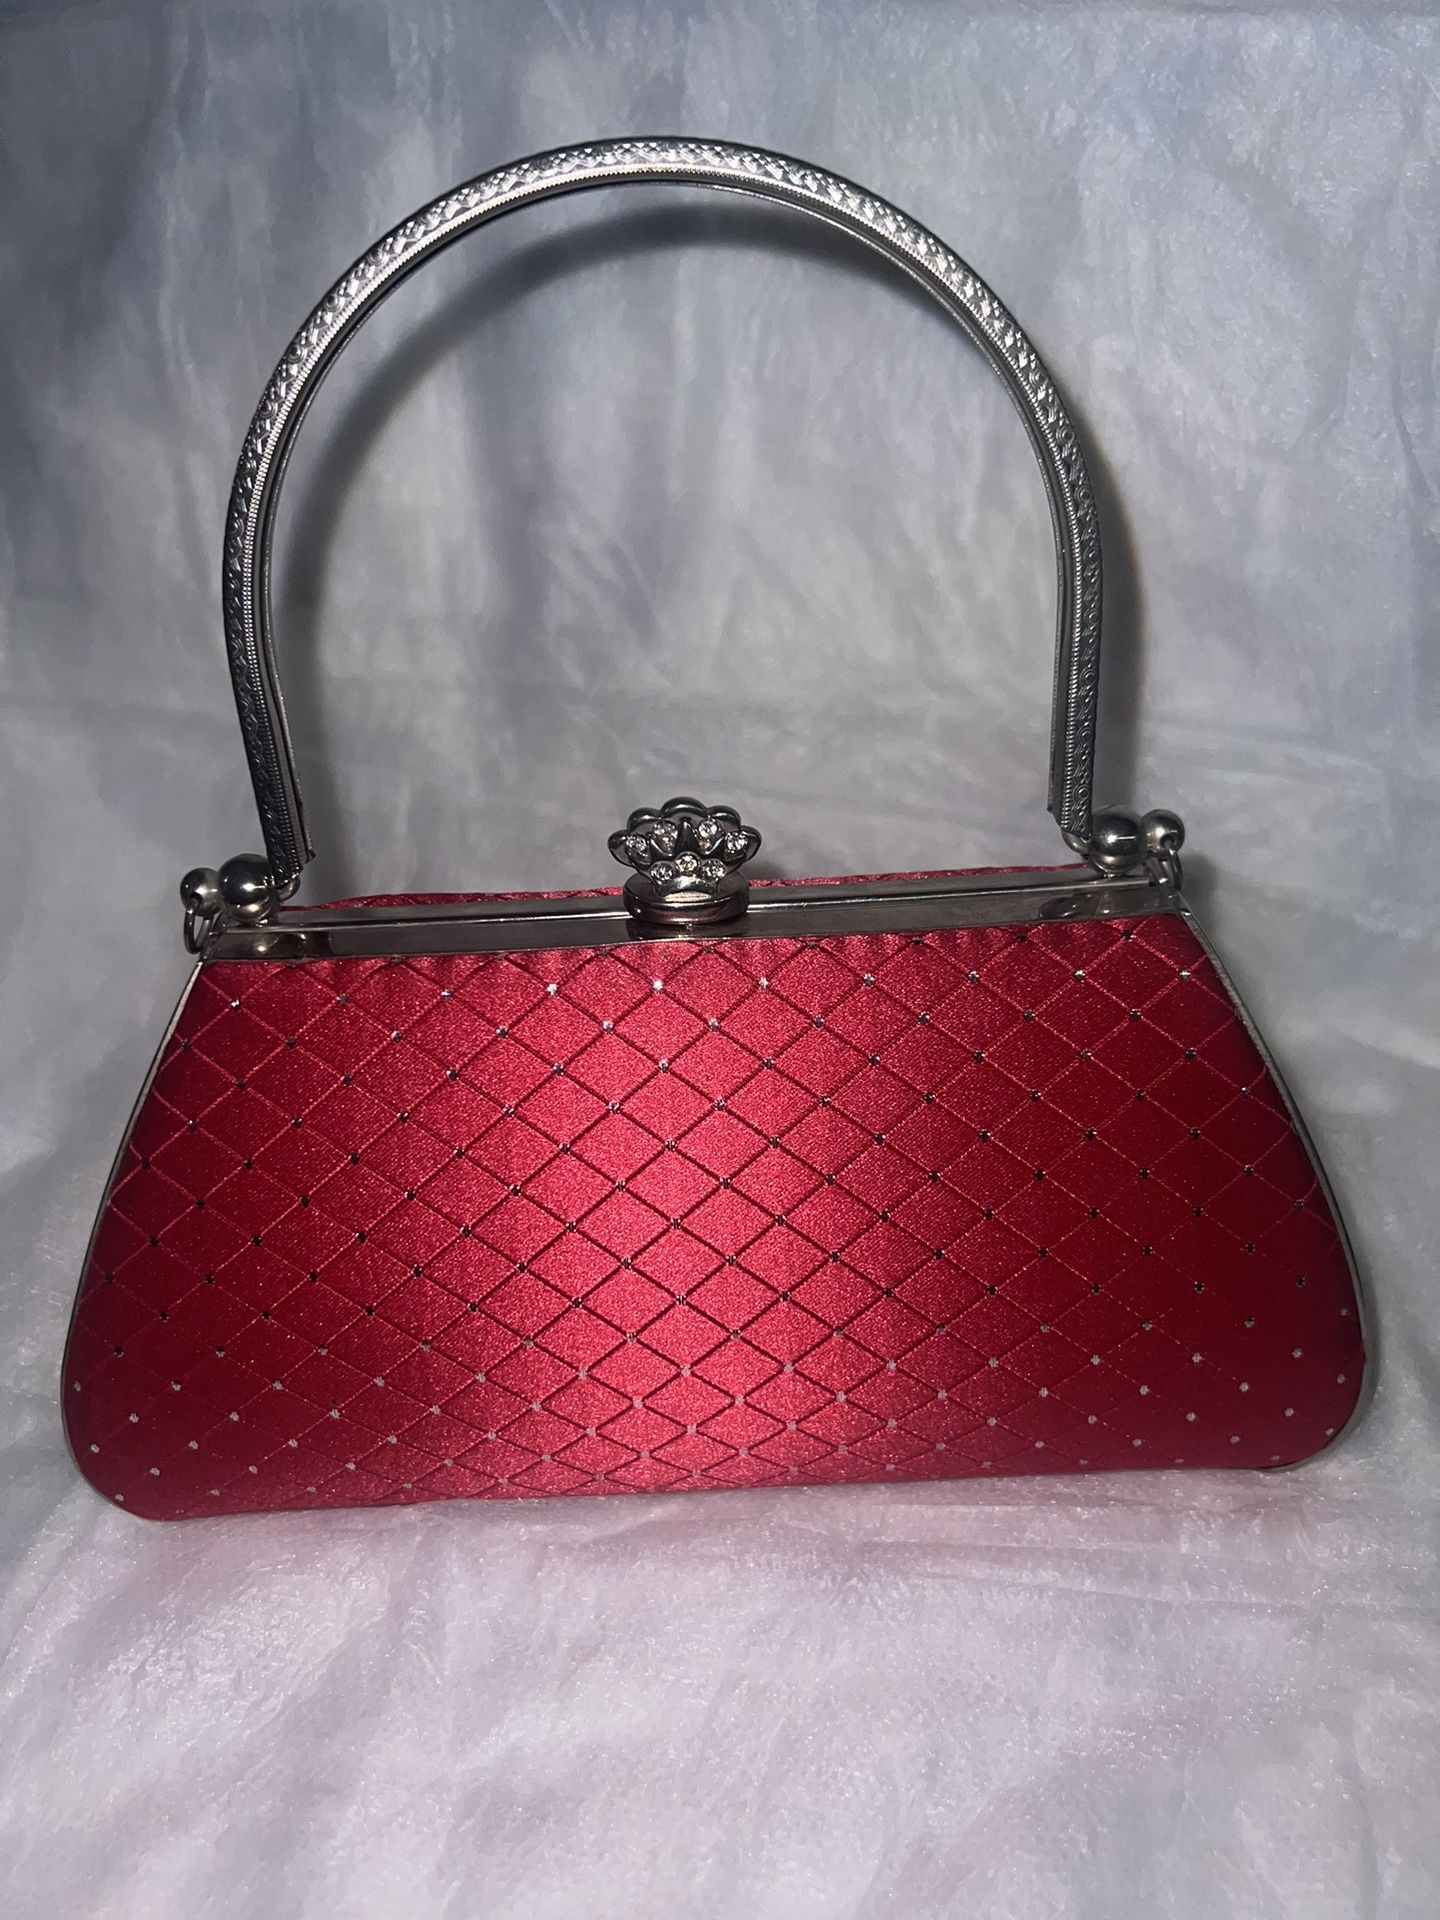 Pink Purse With Silver Trim